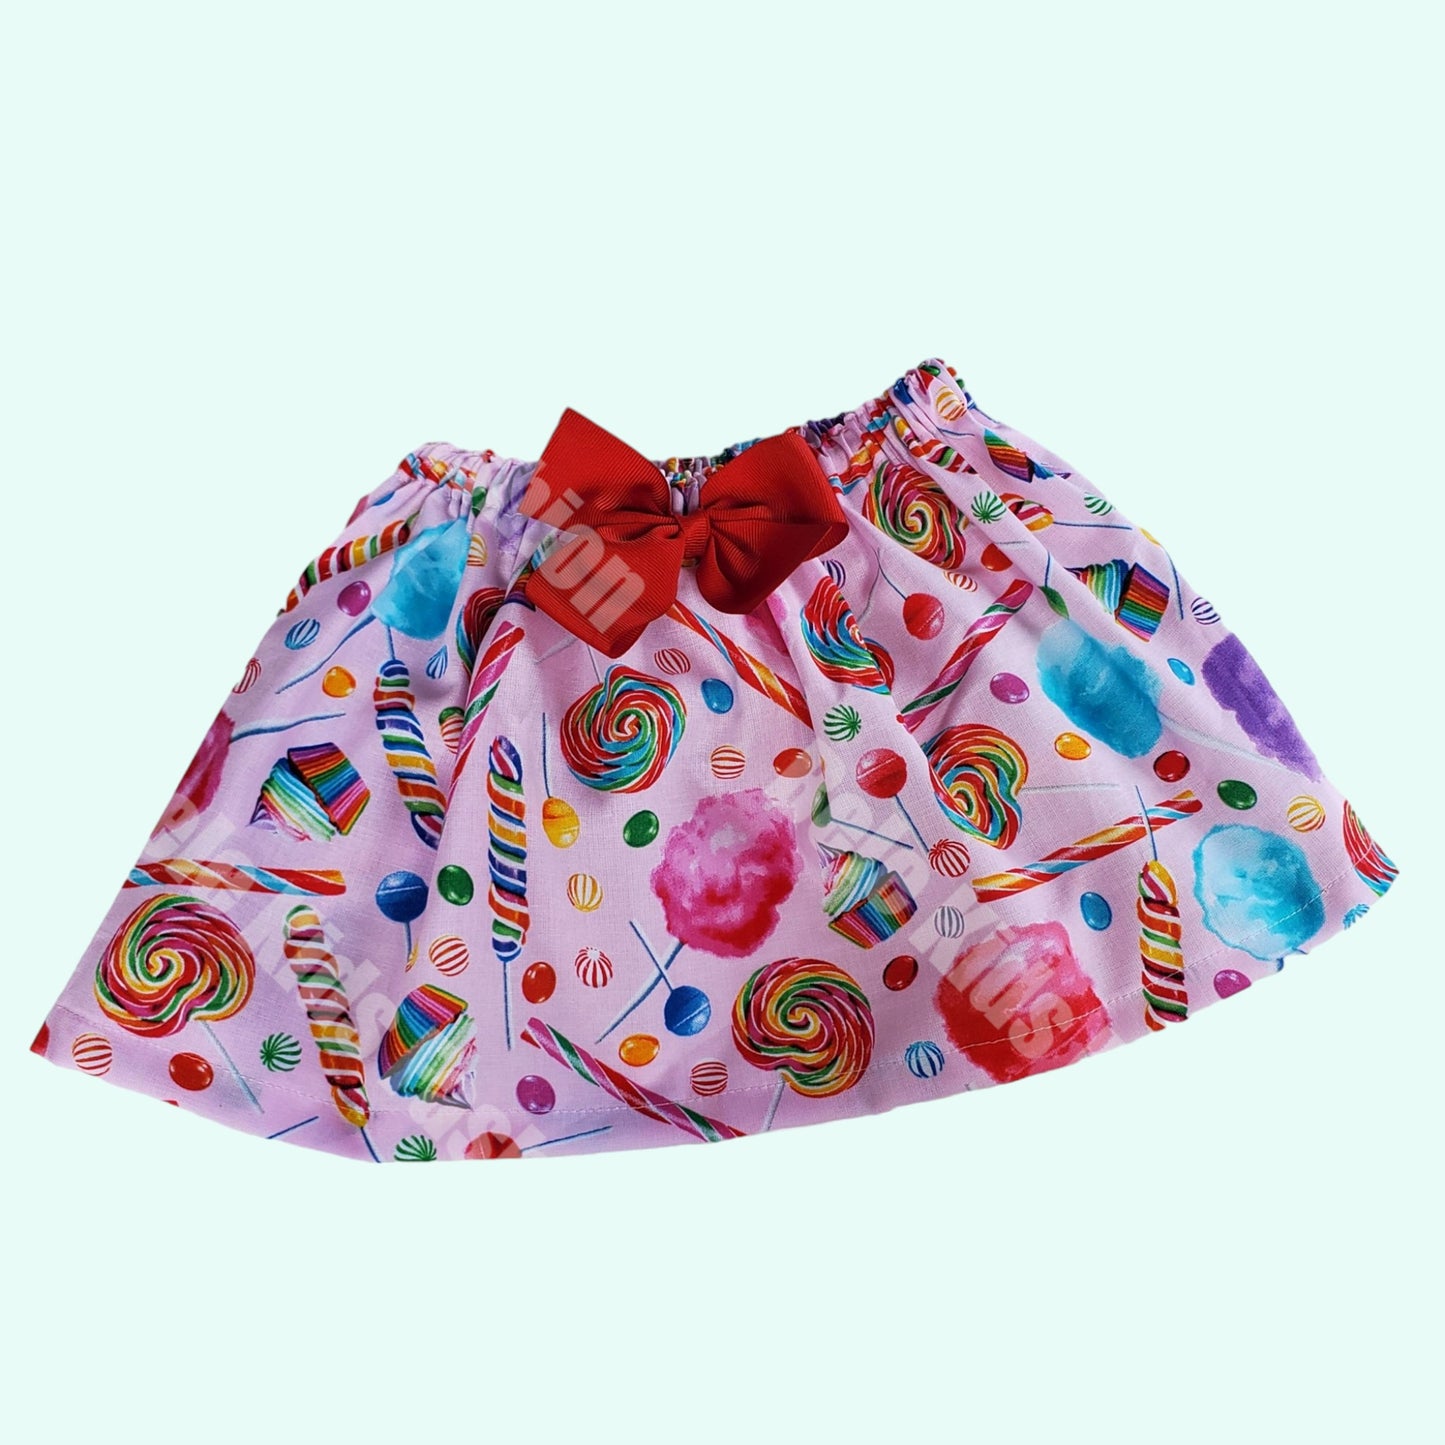 Candyland birthday outfit | Girls onesies outfit | Candy pink skirt outfit | Girls outfit | Girls First Birthday Outfit